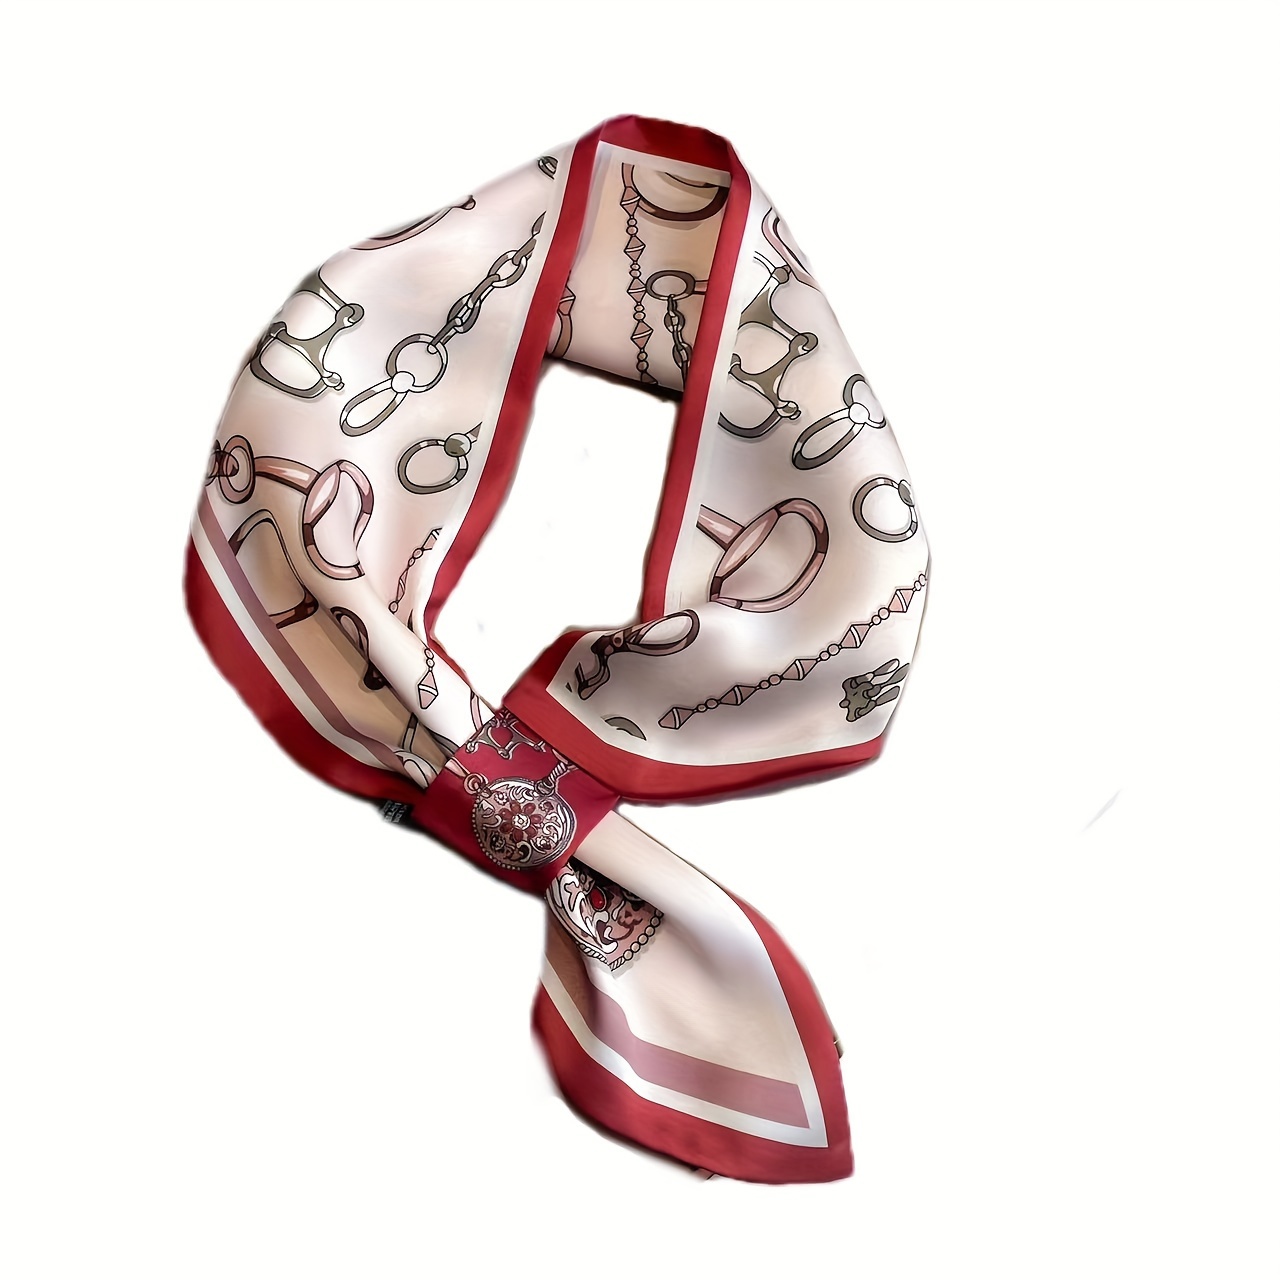 

Luxury Silky Cross Tie Scarf With Ear-like Corners, Mature Style Elegant Accessory For Sophisticated